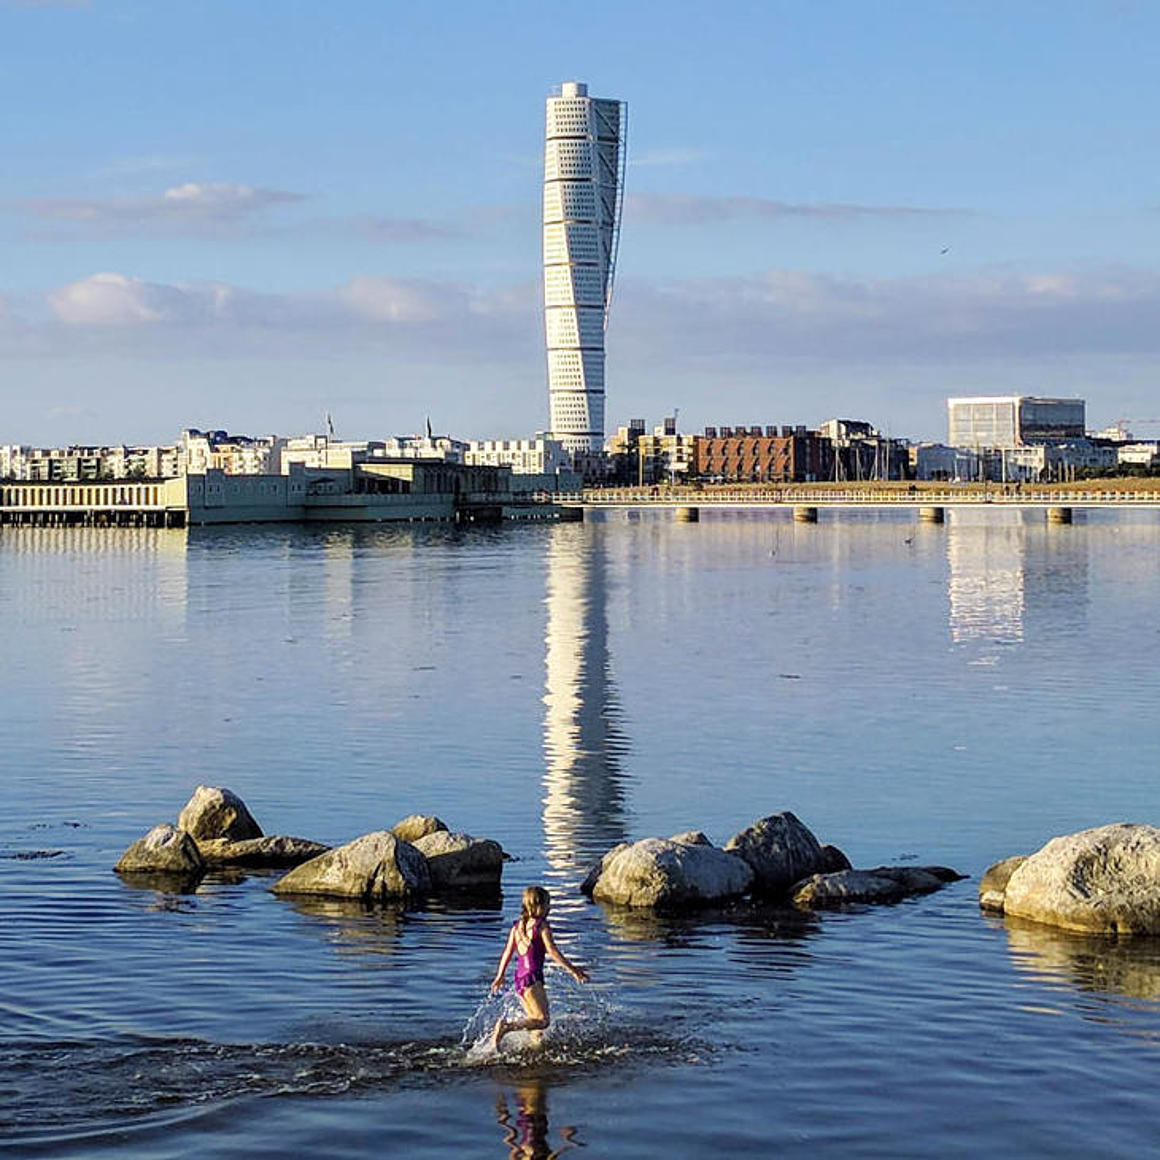 The Turning Torso Malmö is reflected in the water.